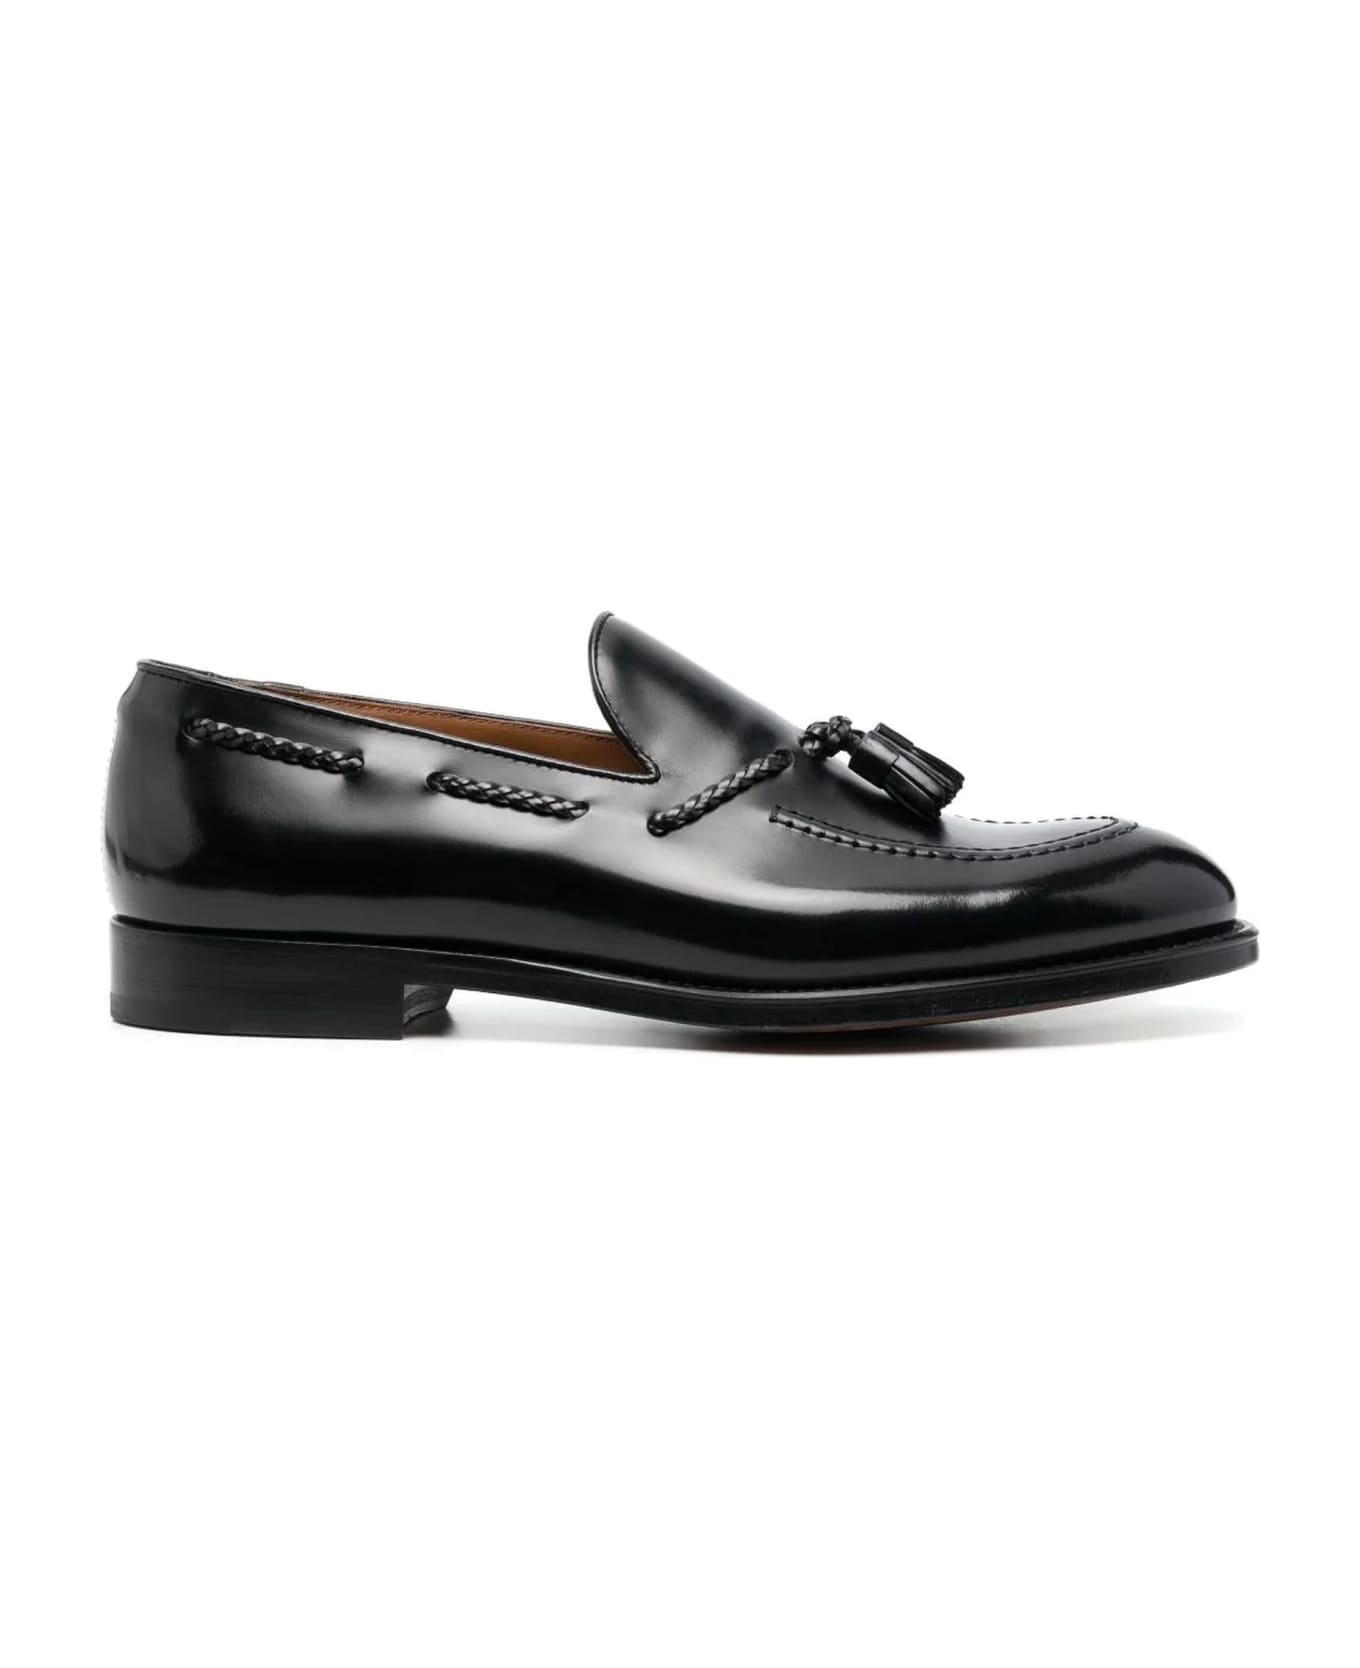 Doucal's Black Calf Leather Loafers - Black ローファー＆デッキシューズ